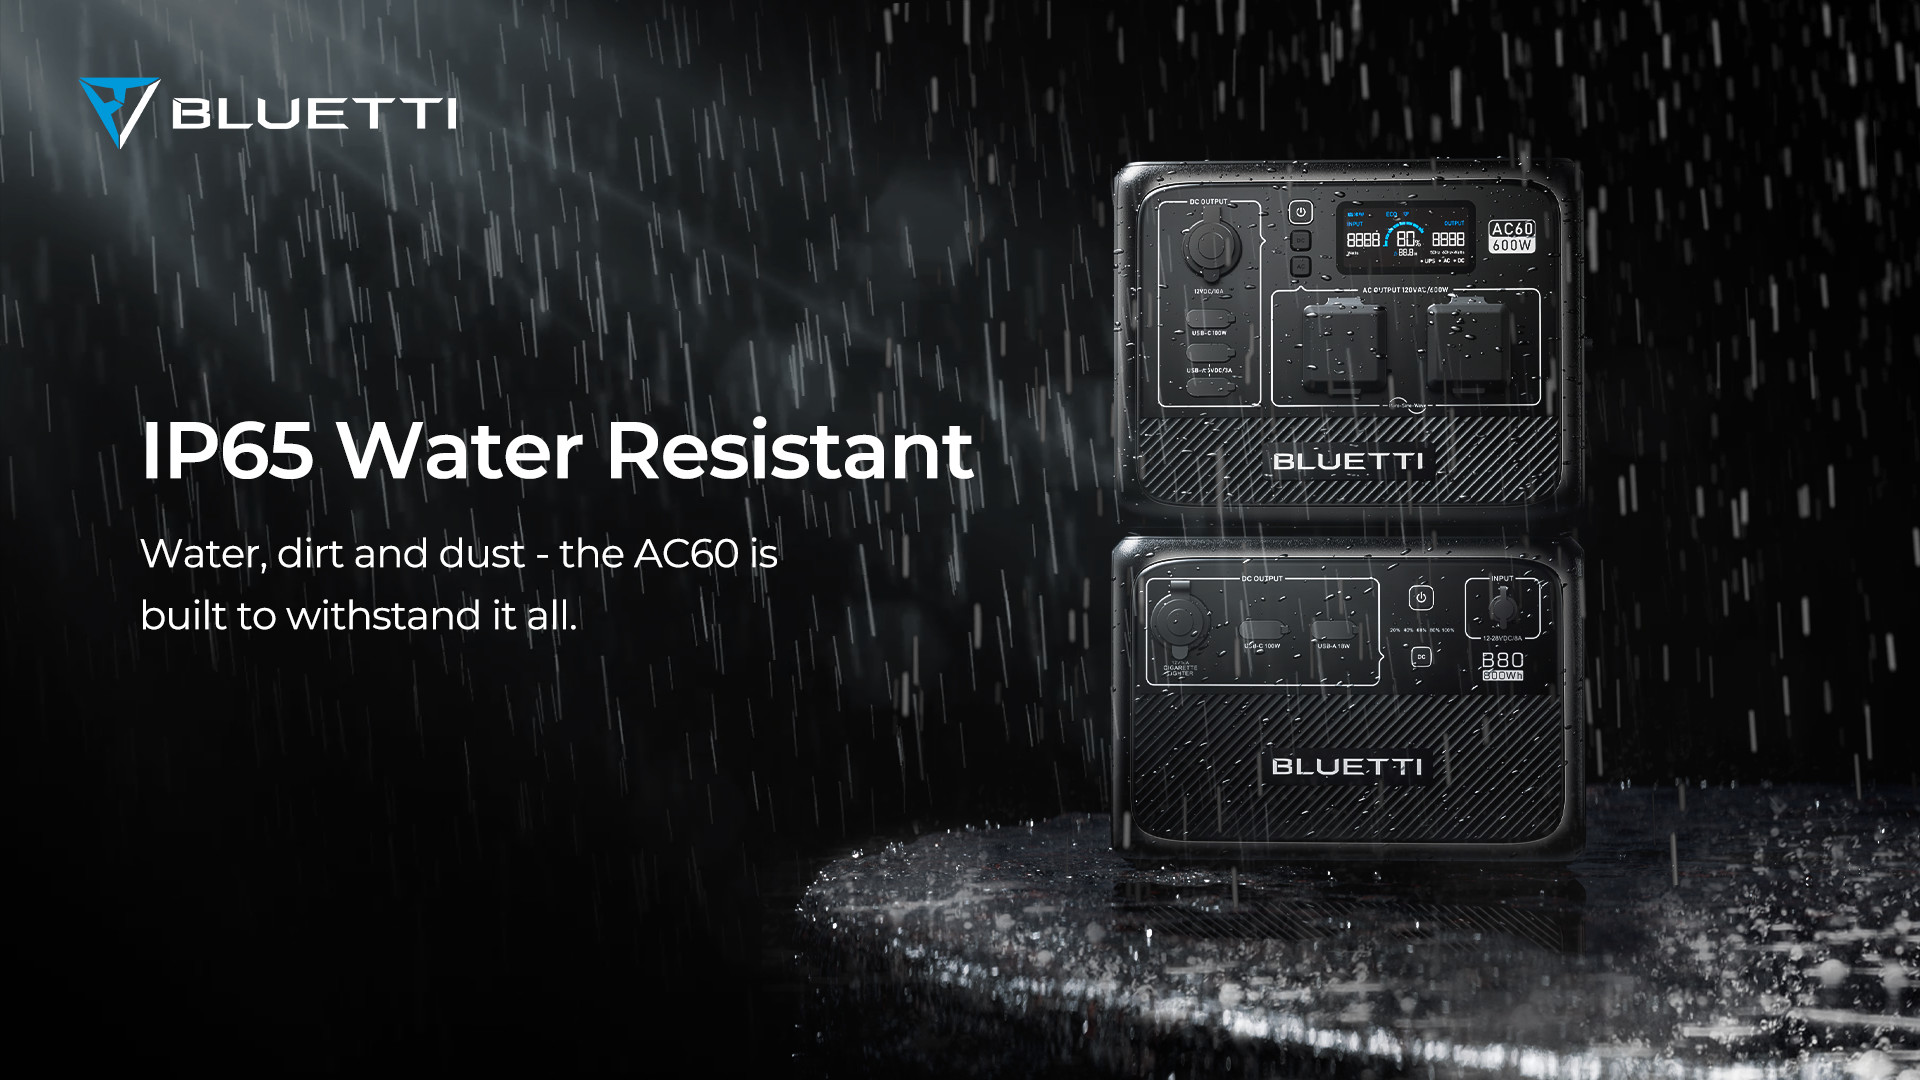 BLUETTI AC60 and B80 water resistance